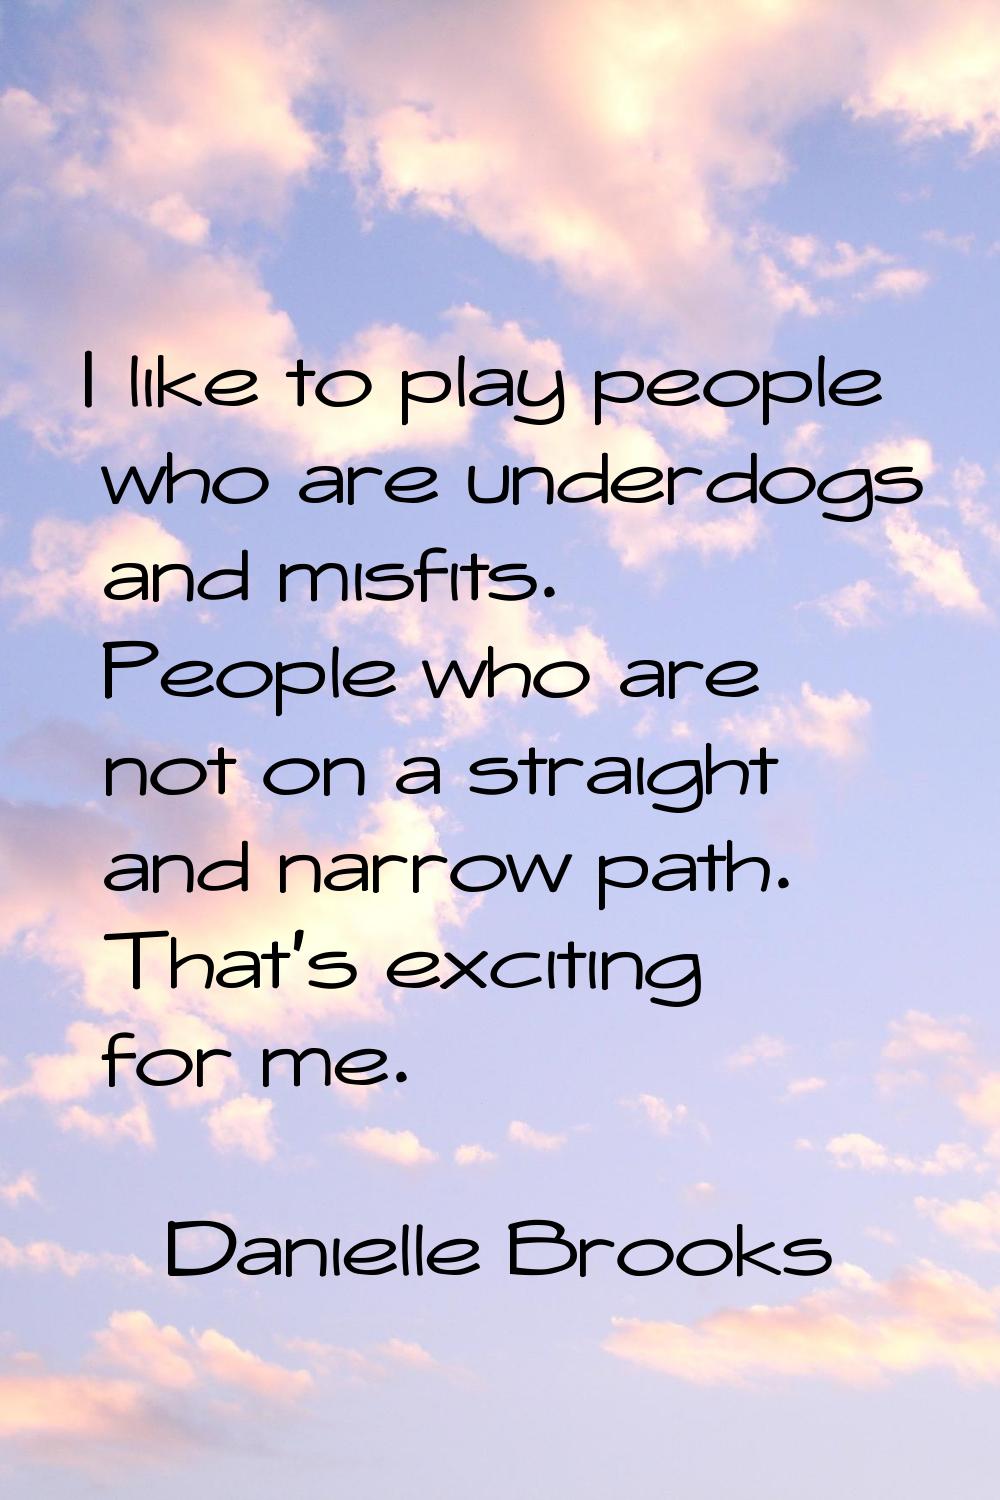 I like to play people who are underdogs and misfits. People who are not on a straight and narrow pa